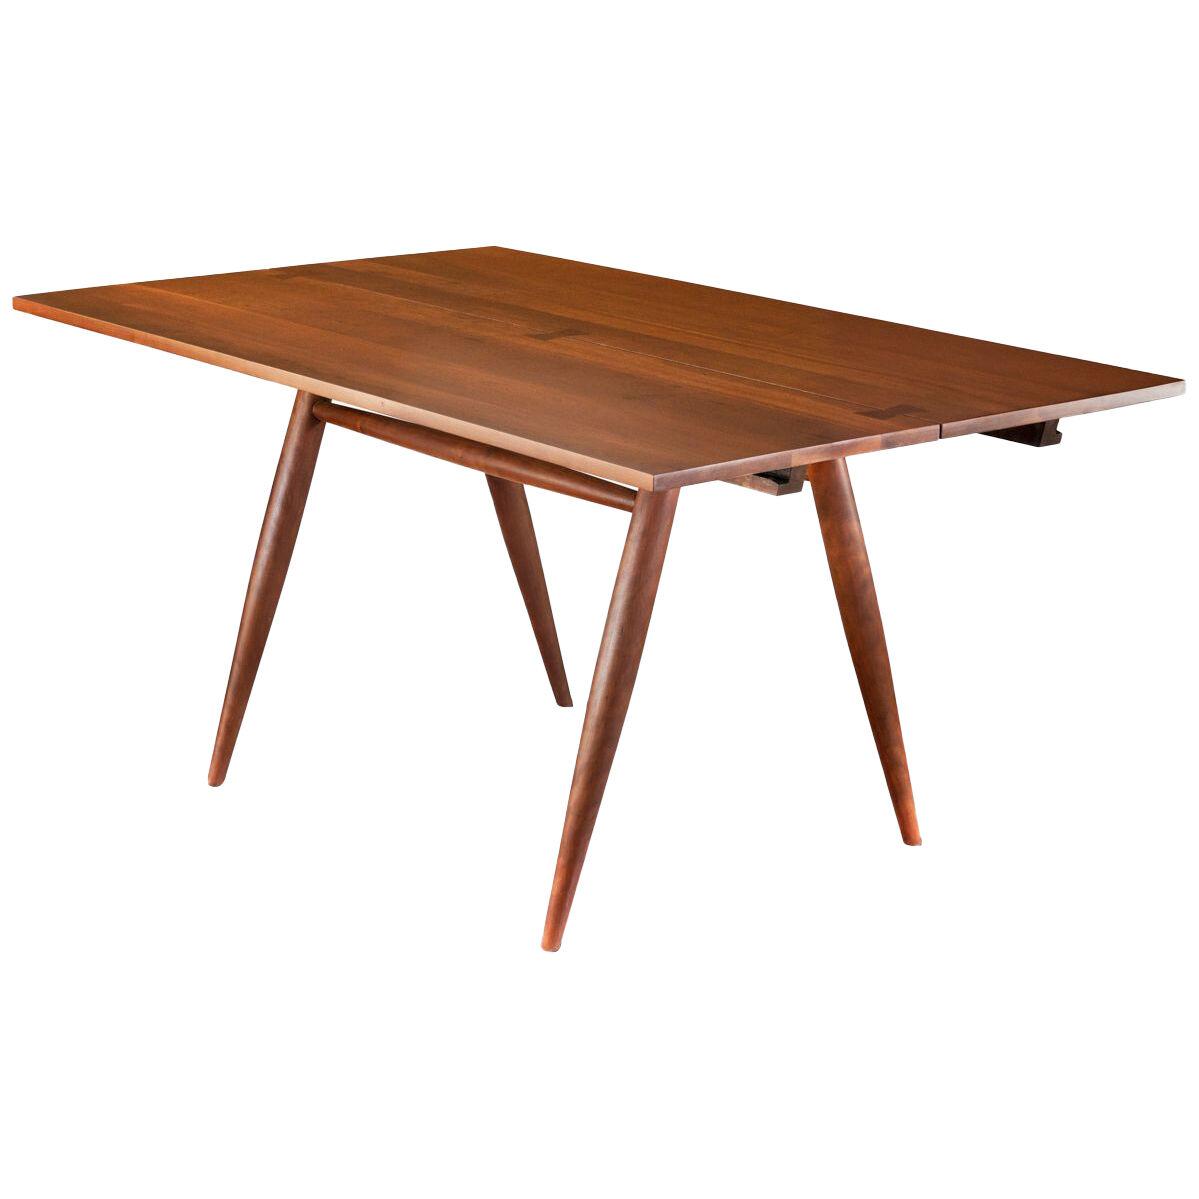 Cherry Turned Leg Dining Table with two extensions